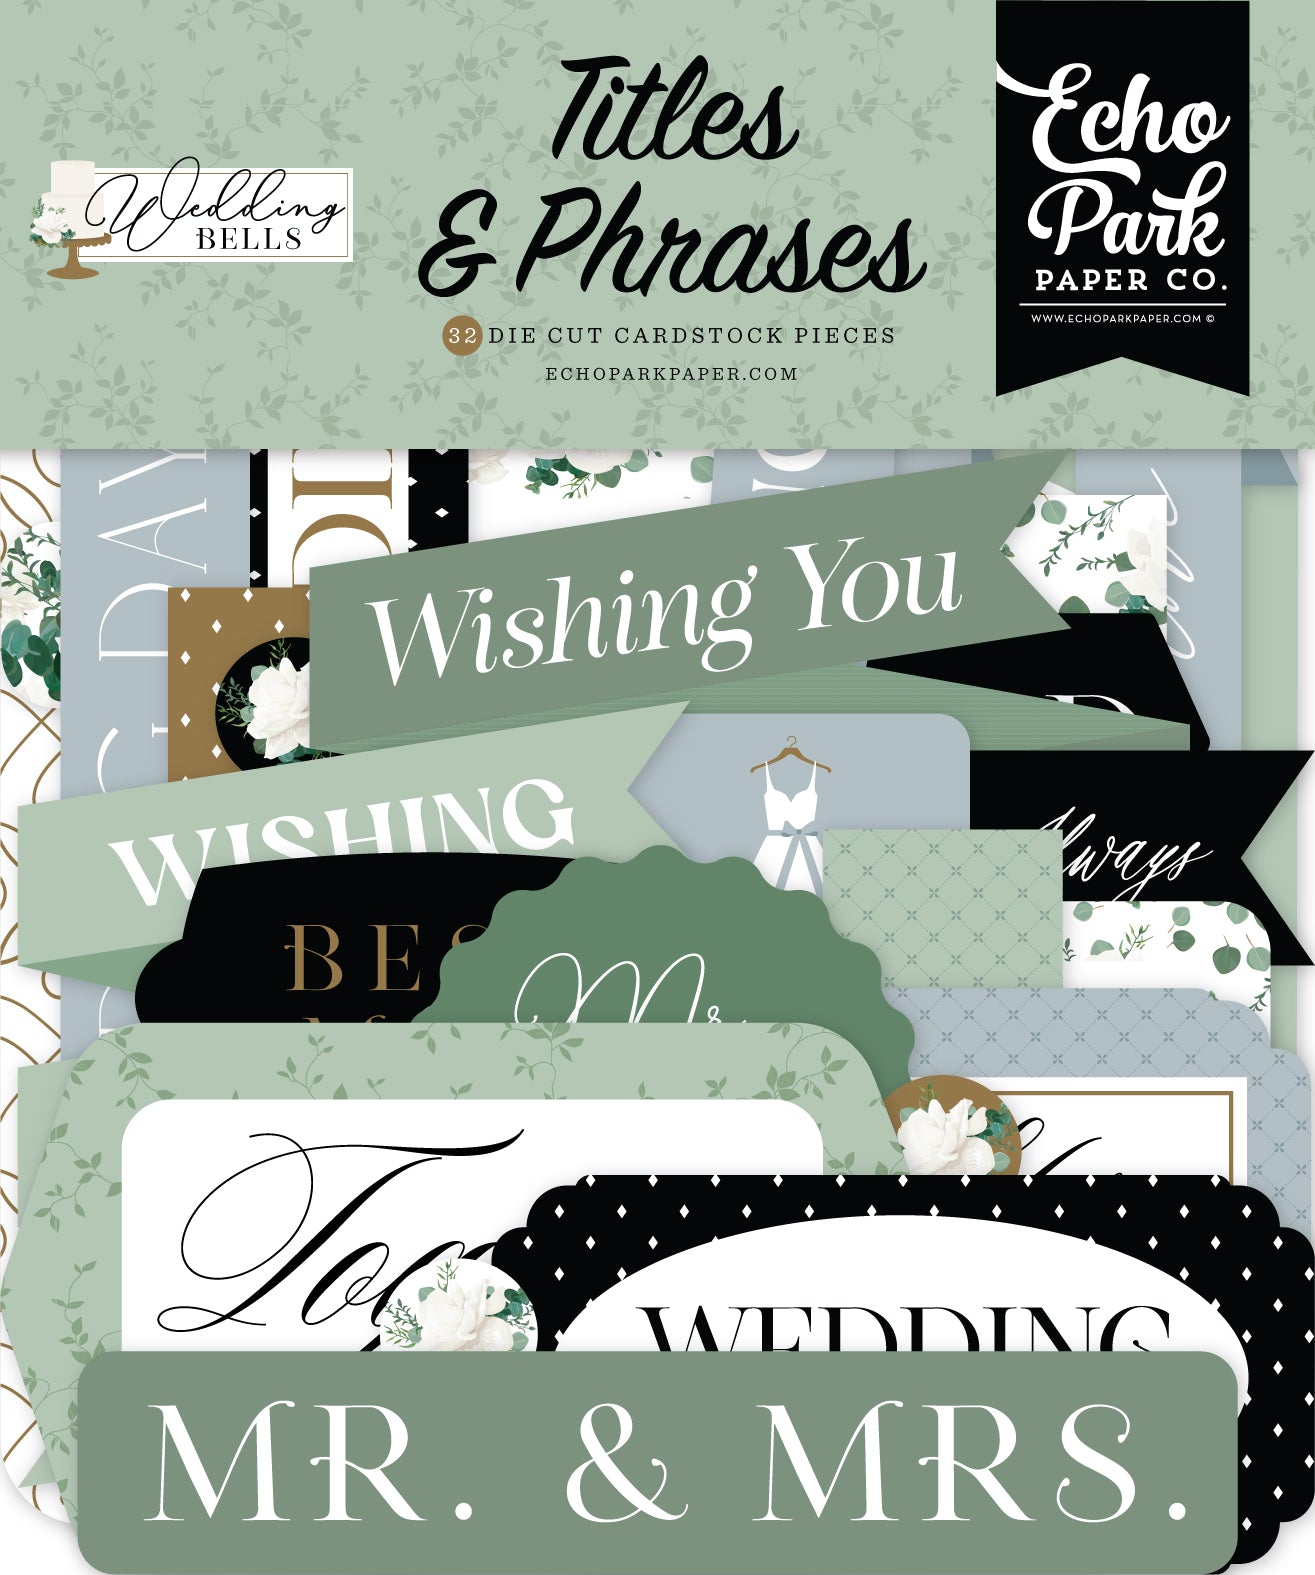 Wedding Bells Collection 5 x 5 Scrapbook Titles & Phrases by Echo Park